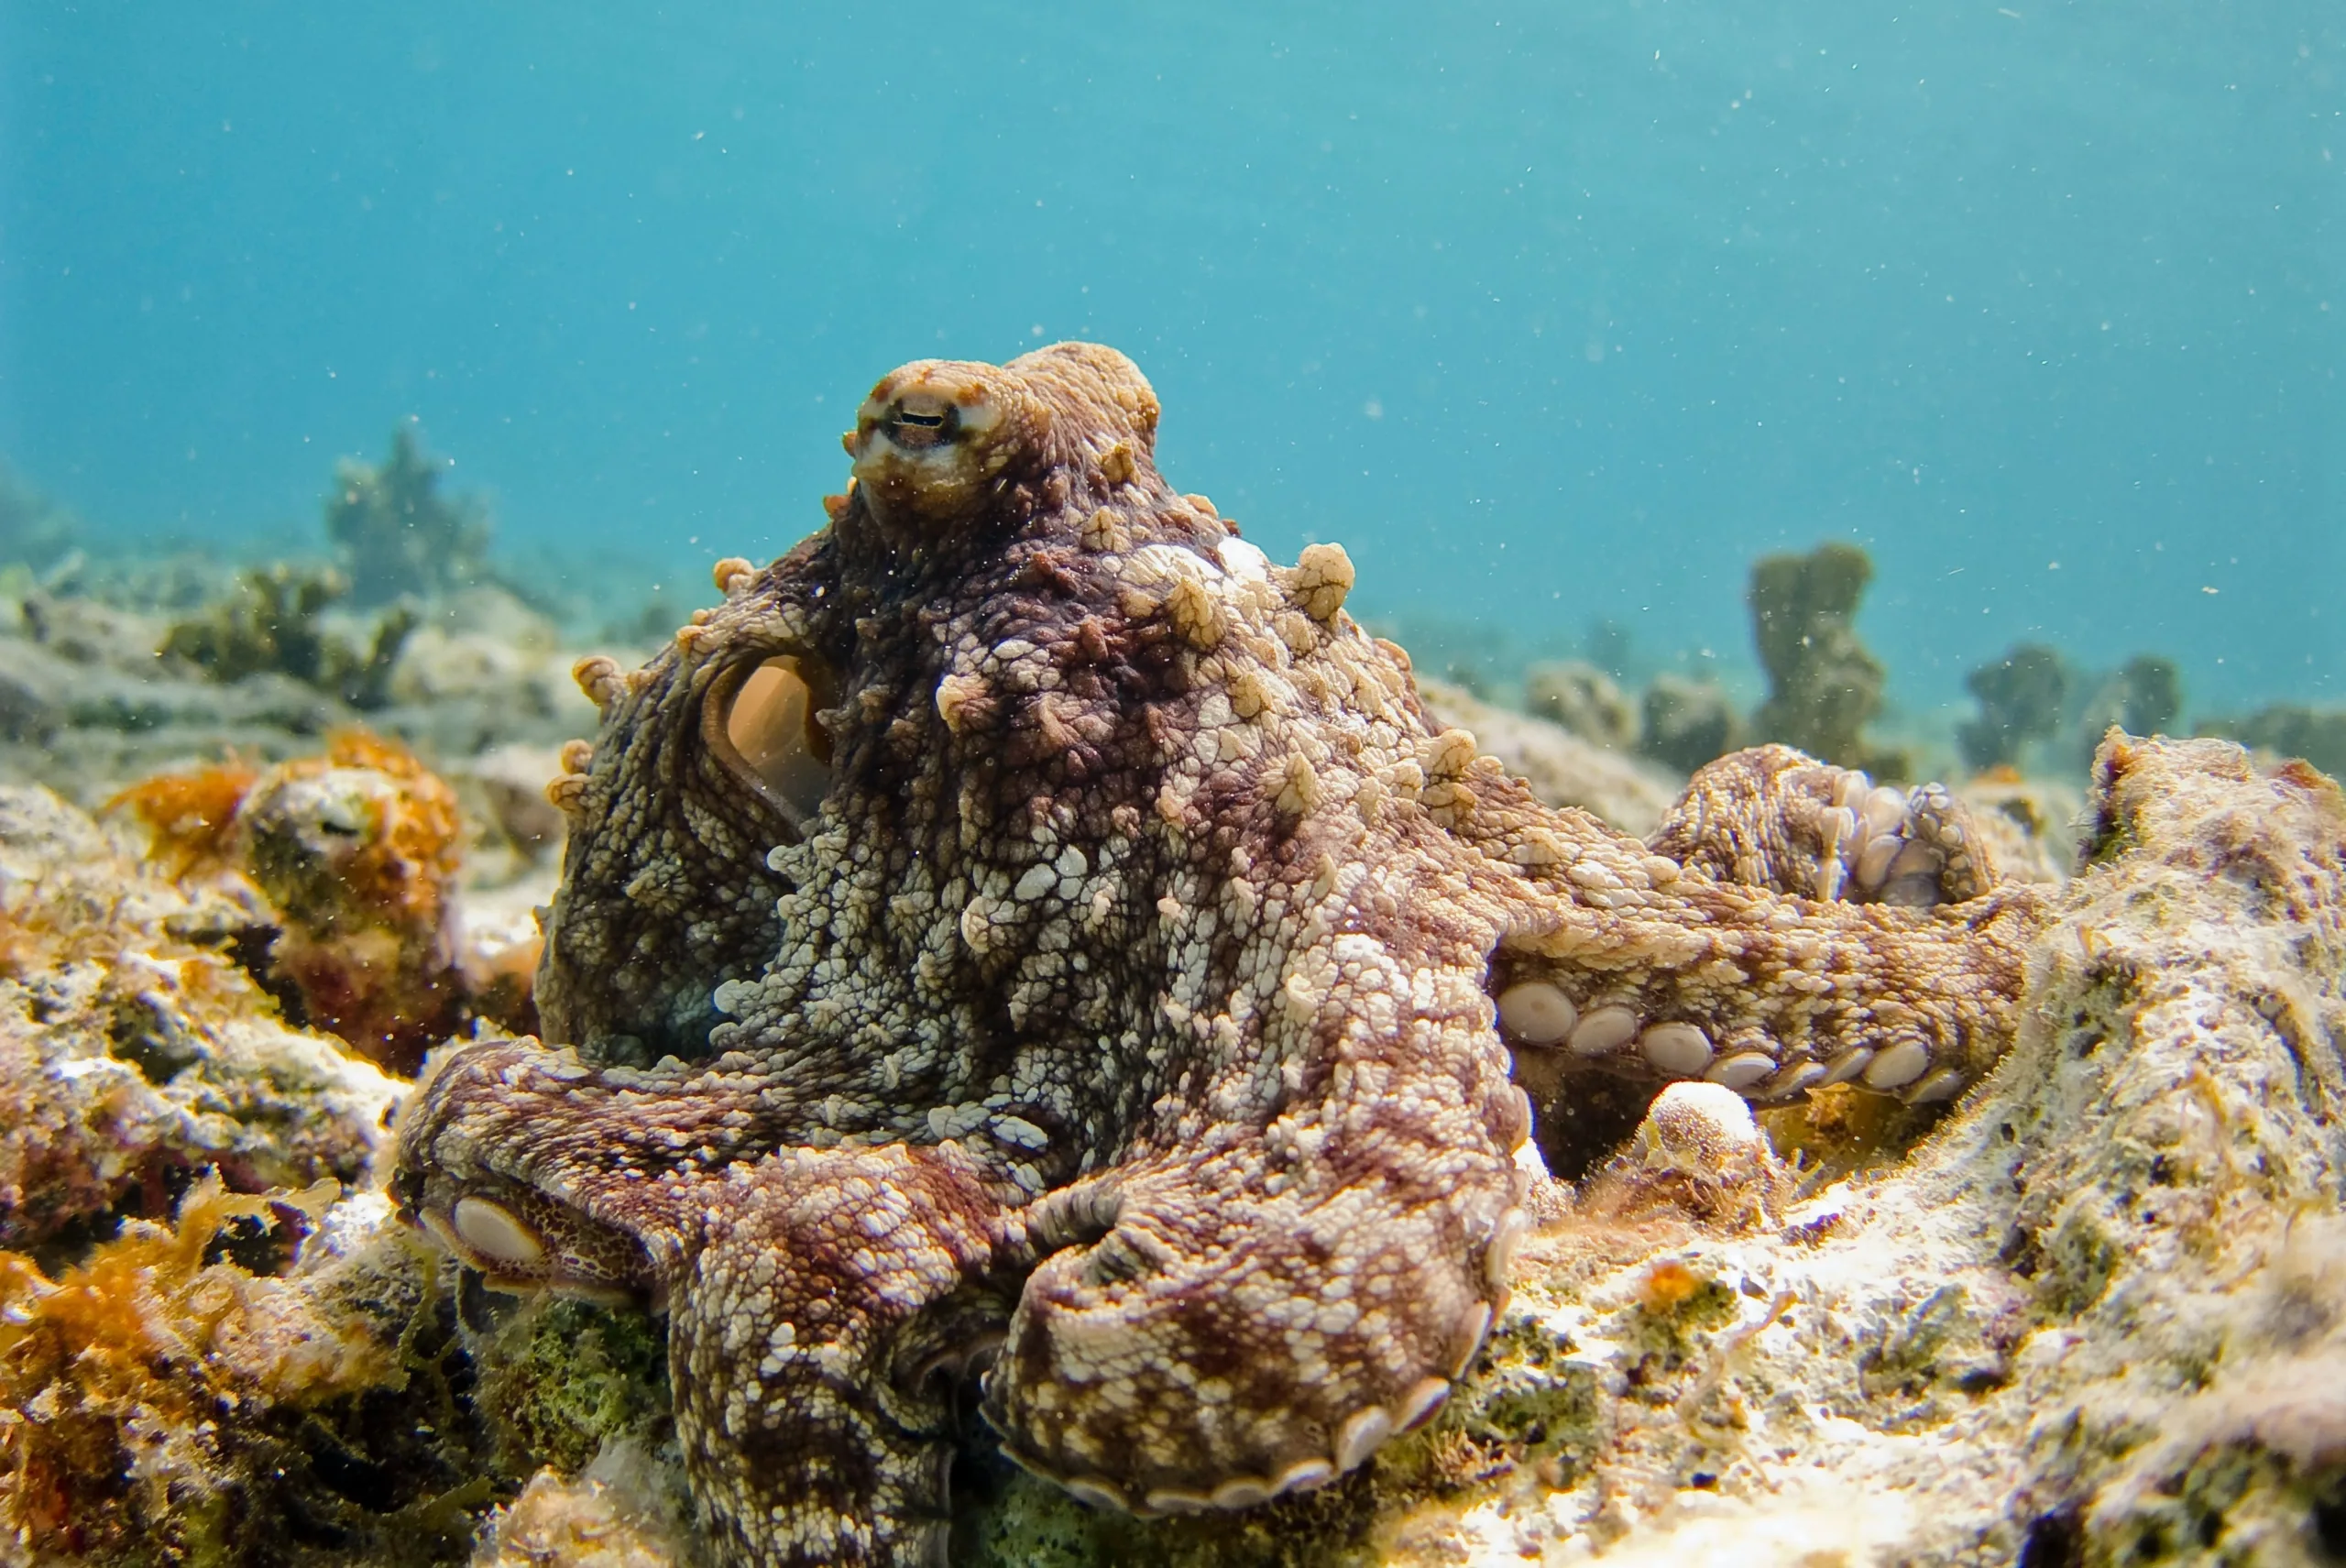 Octopus Decline: A Troubling Trend in Tunisia